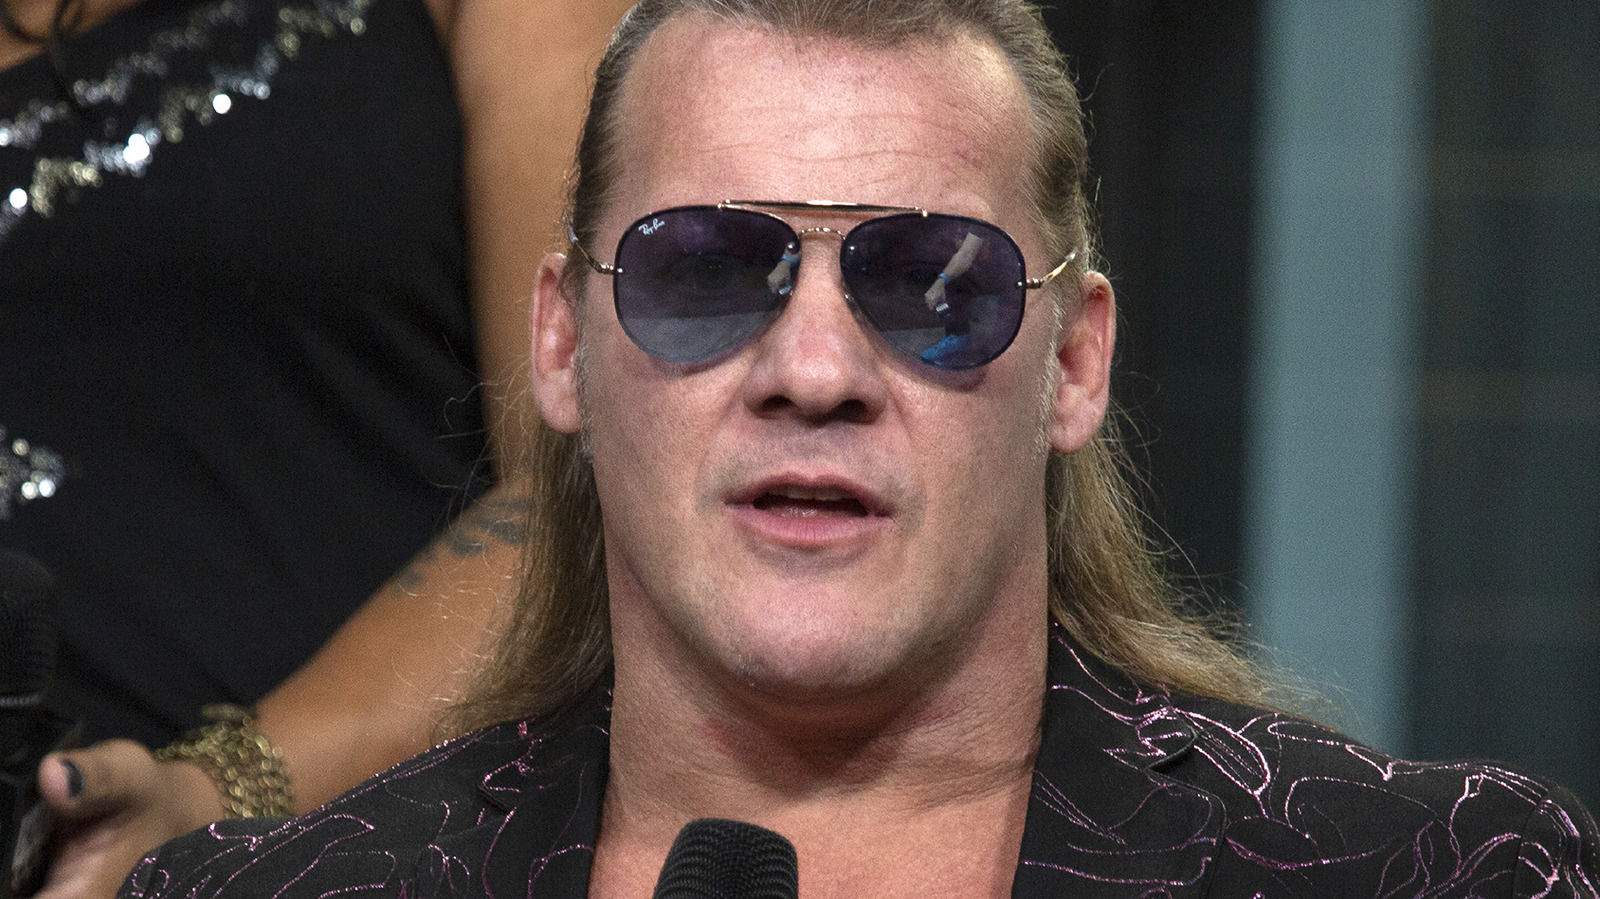 Chris Jericho To Defend Roh Title In Four Way At Aew Full Gear